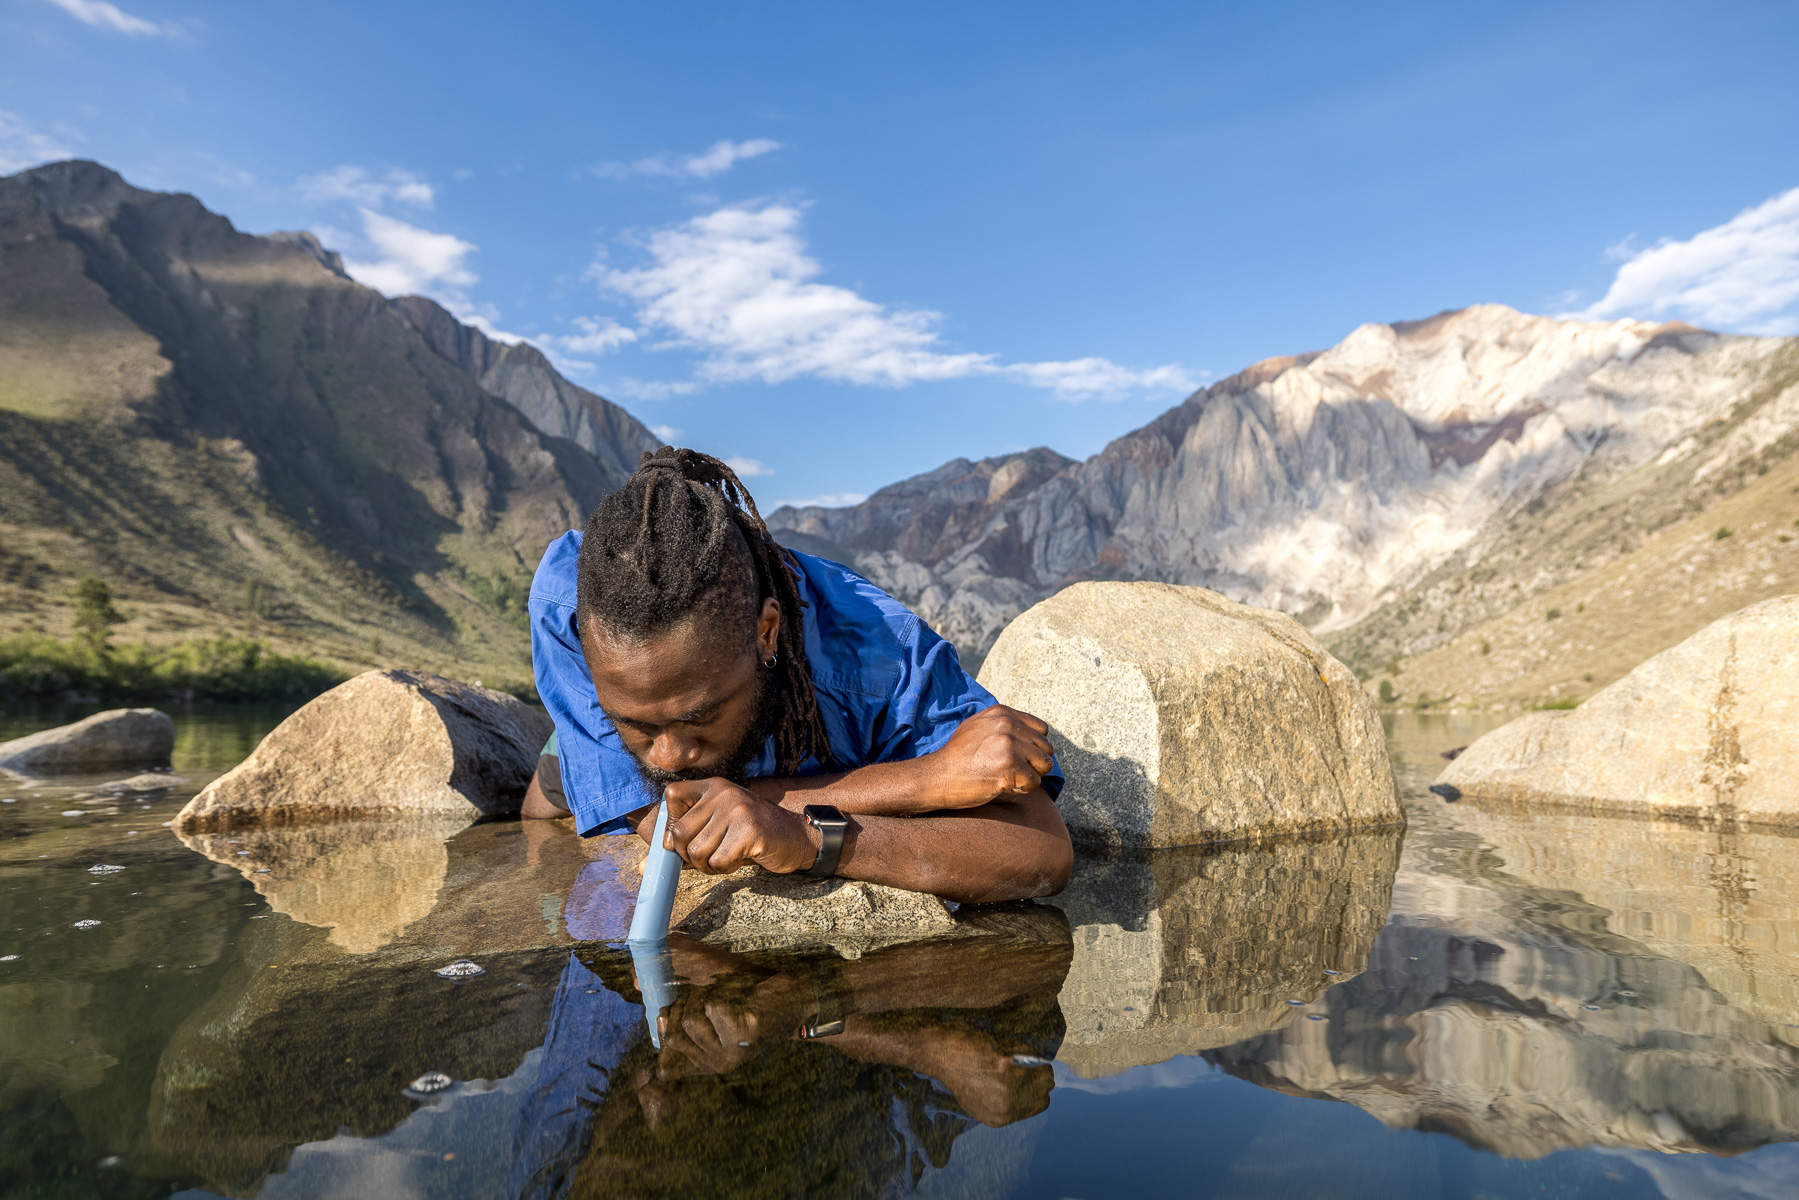 LifeStraw: Tested and Reviewed